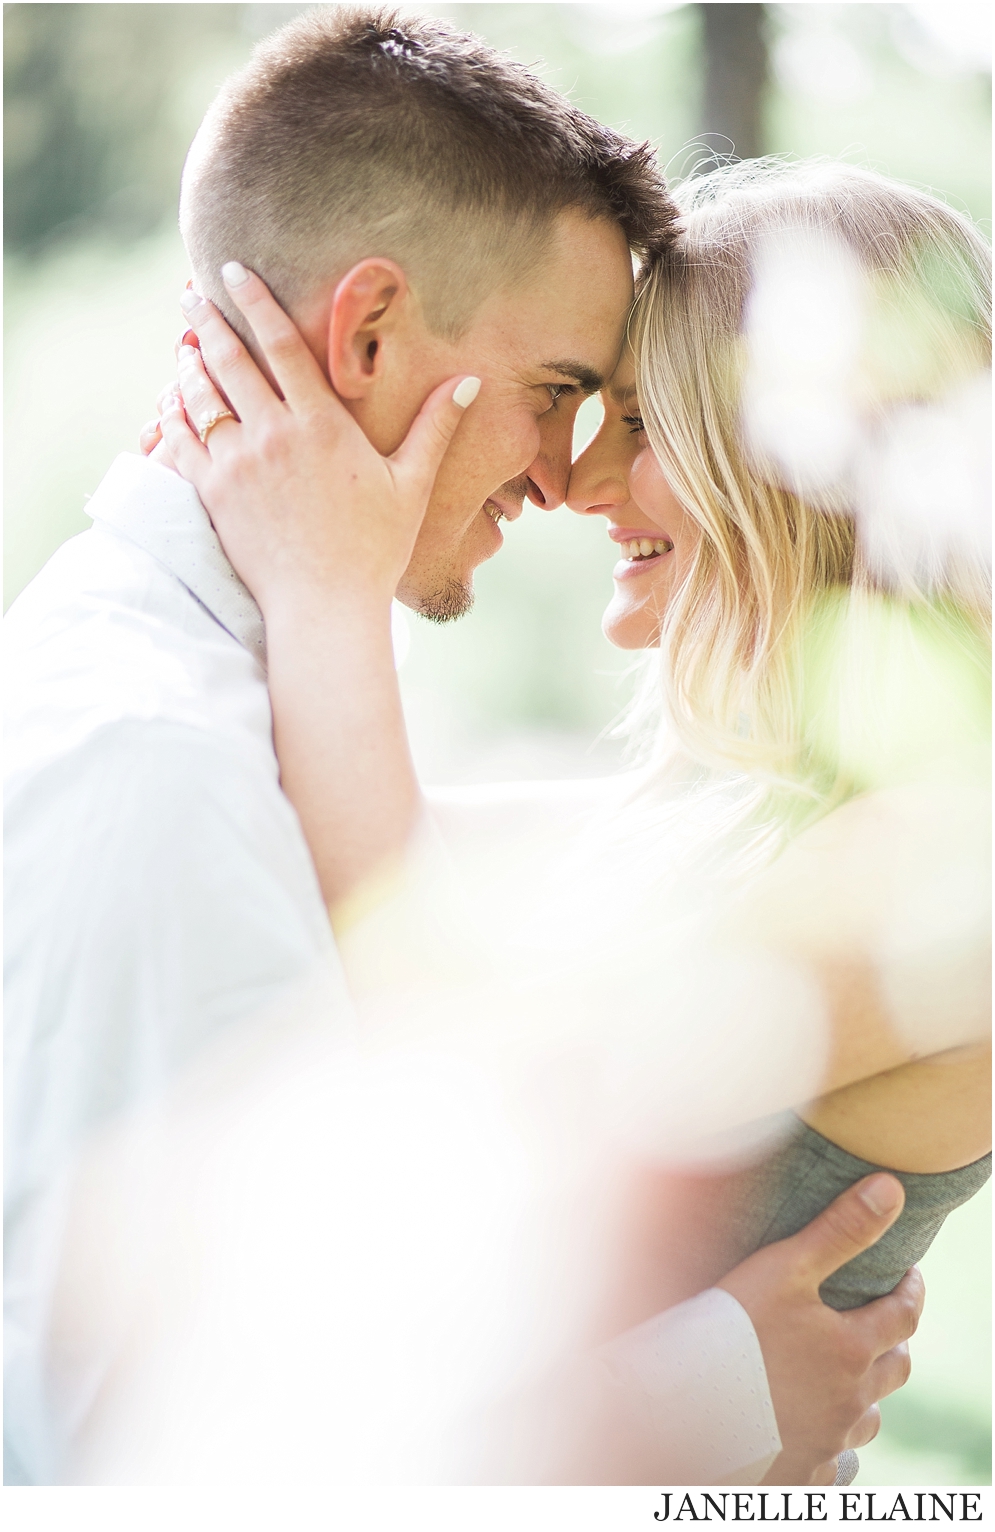 tricia and nate engagement photos-janelle elaine photography-73.jpg